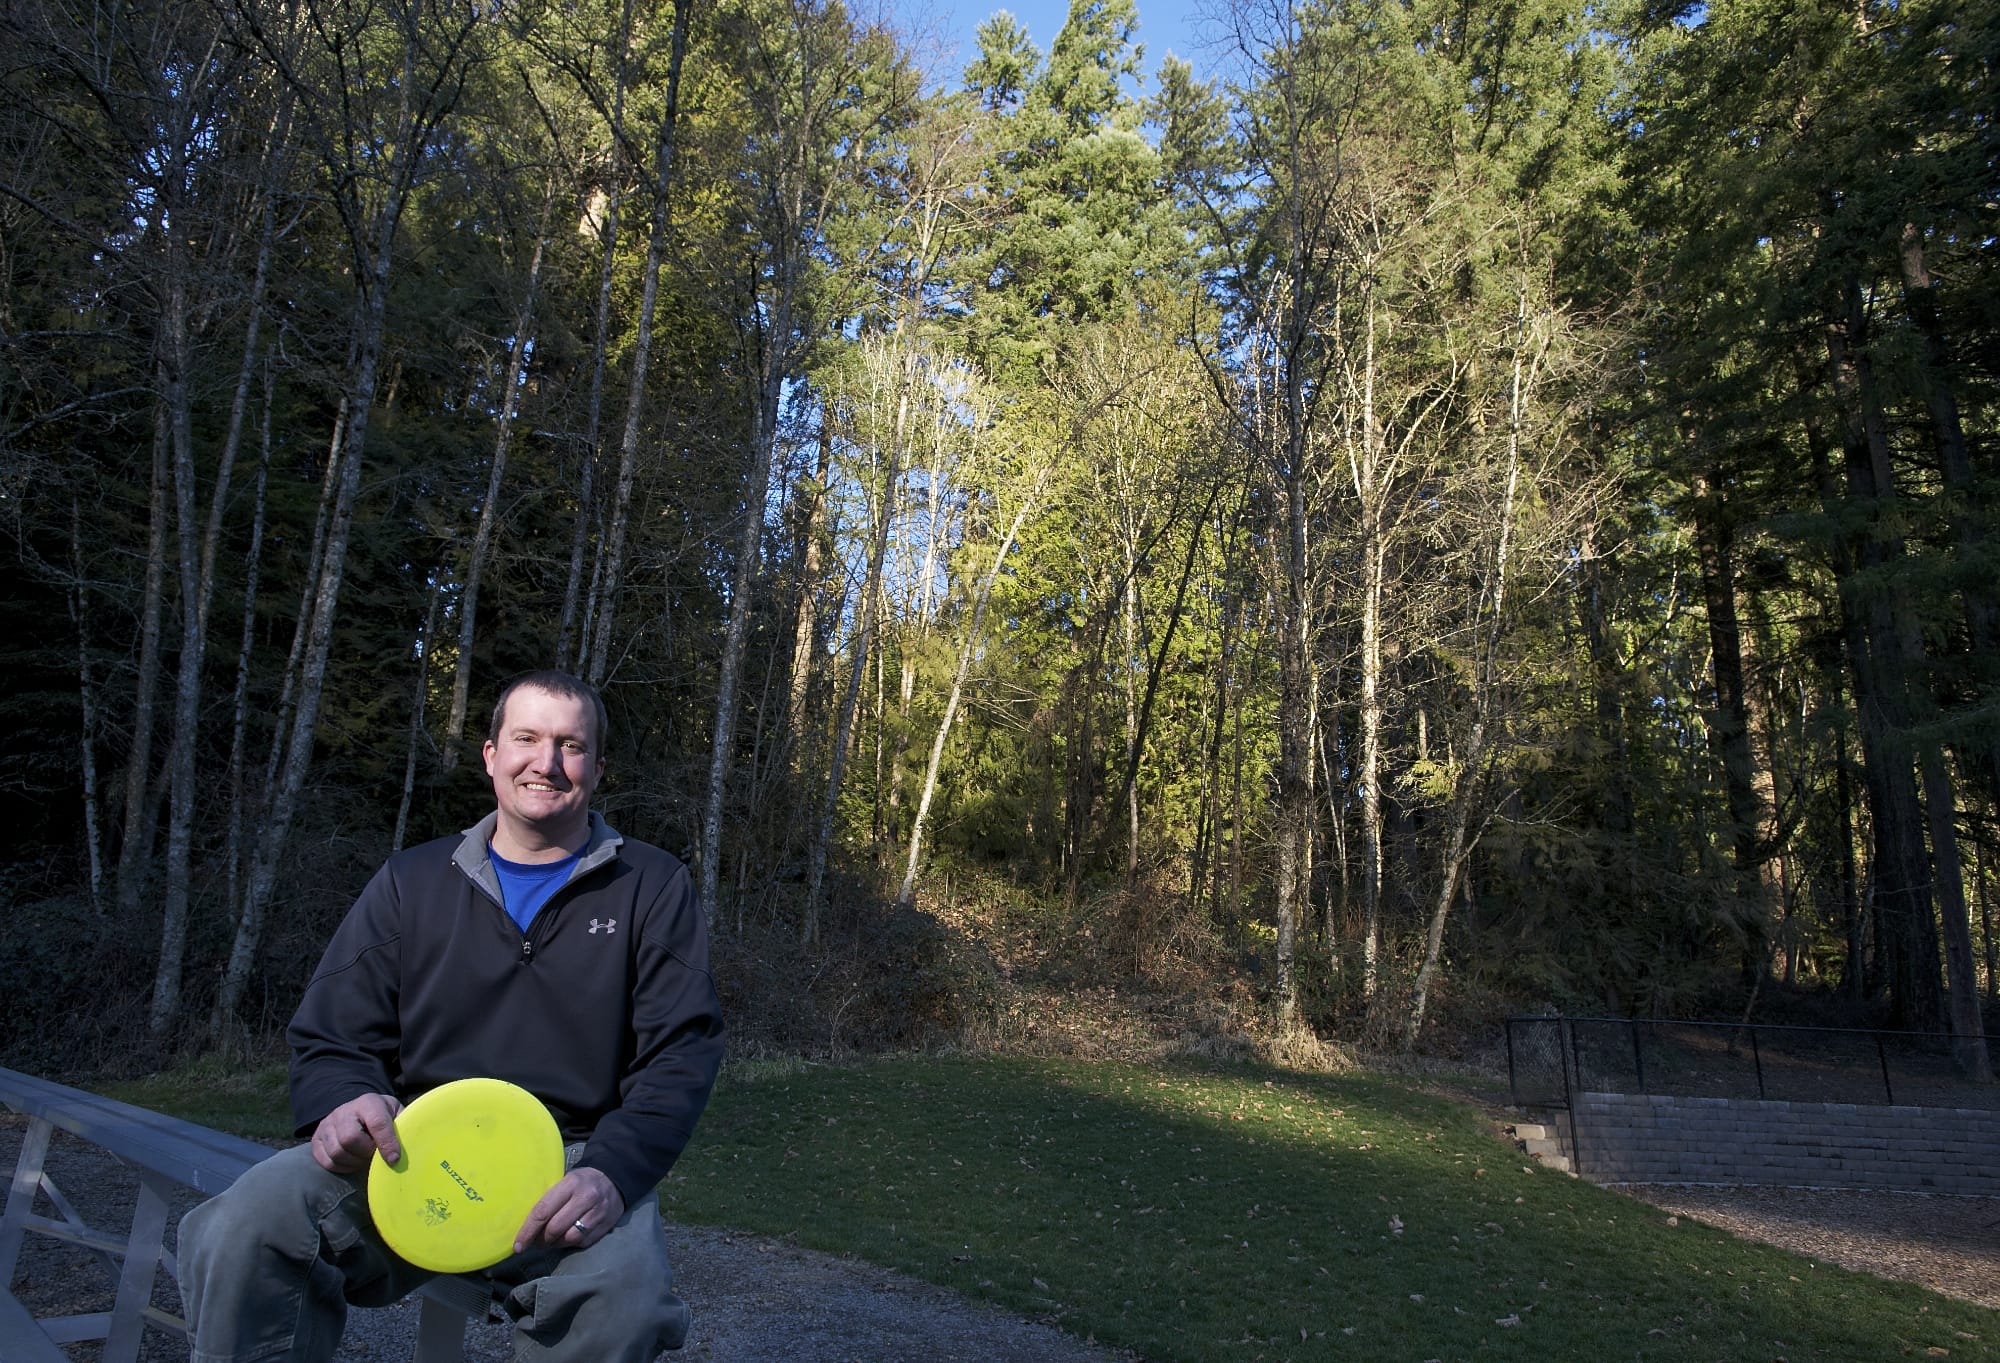 Mike Nemeth, who serves on Ridgefield's parks board and is the project lead in efforts to develop a disc golf course at Ridgefield's Abrams Park, sits near the wooded embankment where the course is proposed.